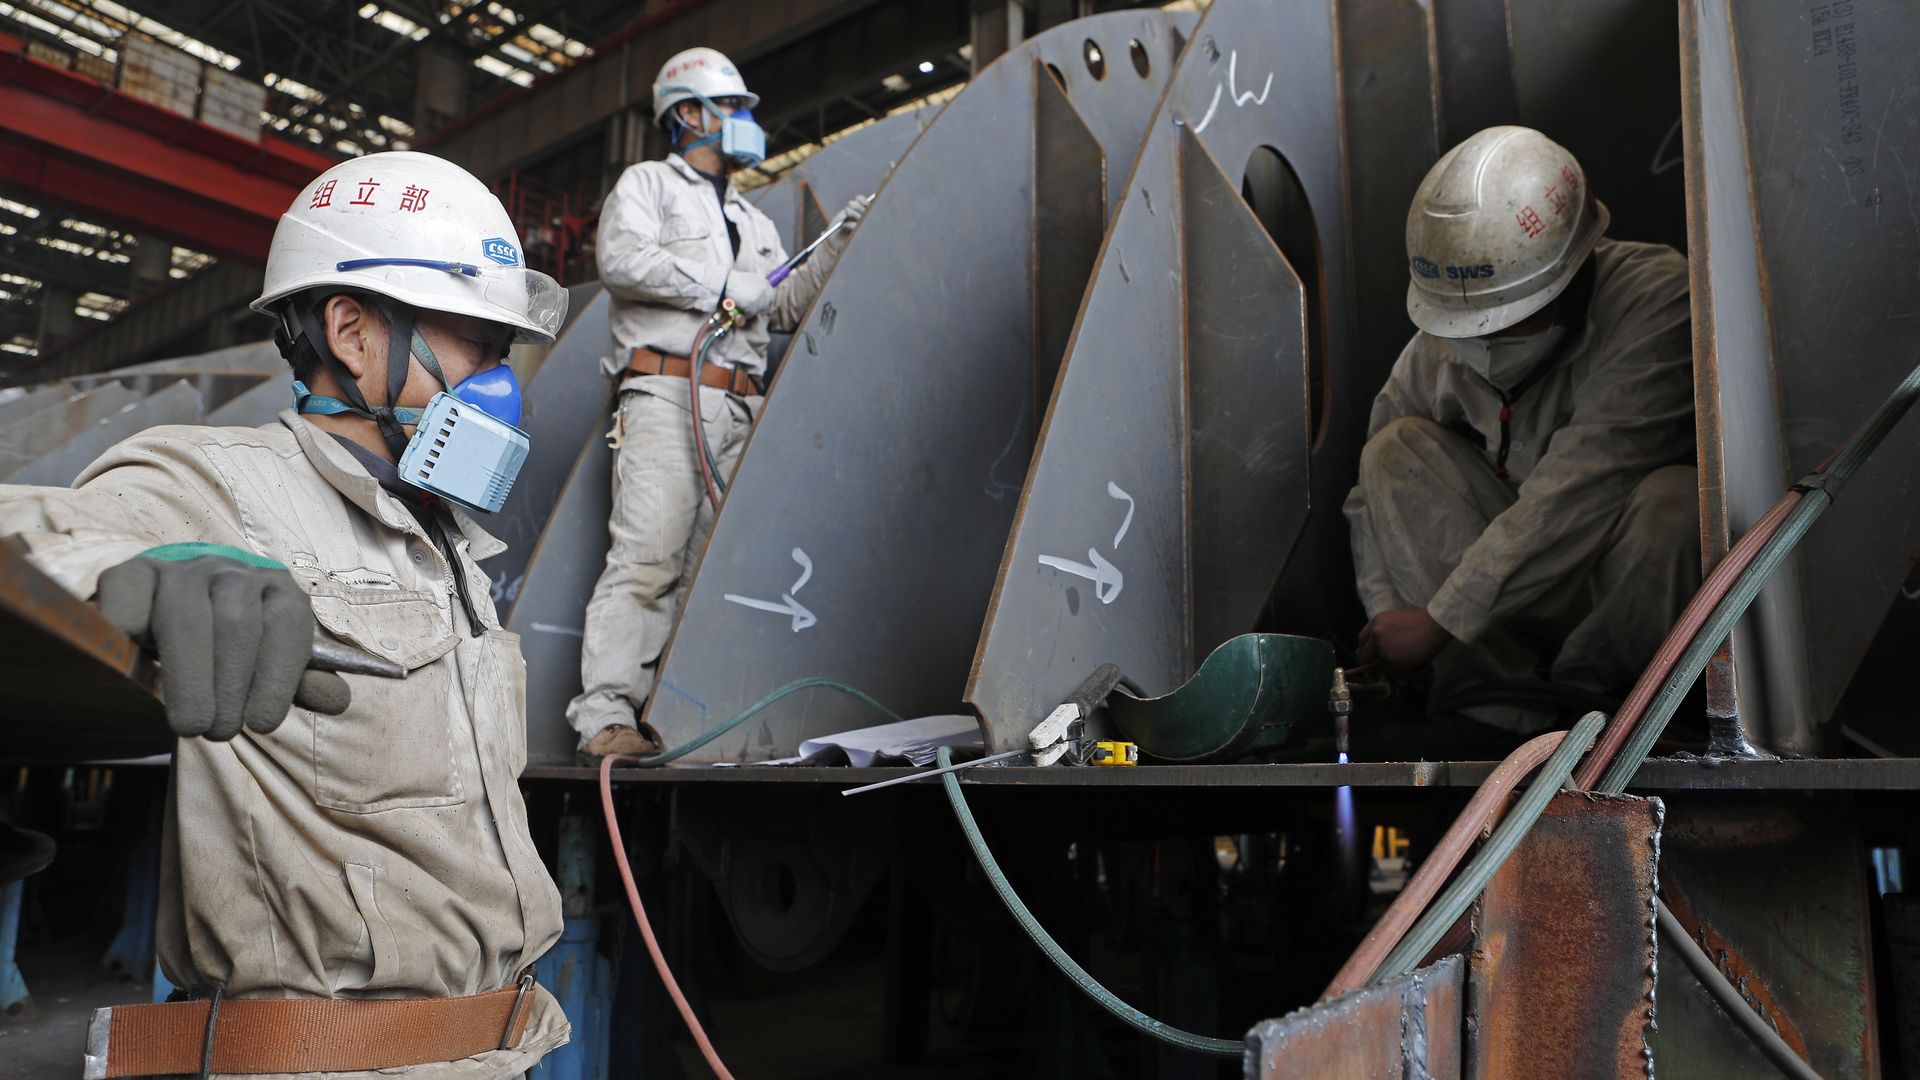 Employees wearing face masks weld parts of ship at Shanghai Waigaoqiao Shipbuilding (SWS) company amid the novel coronavirus outbreak on March 3, 2020 in Shanghai, China. 